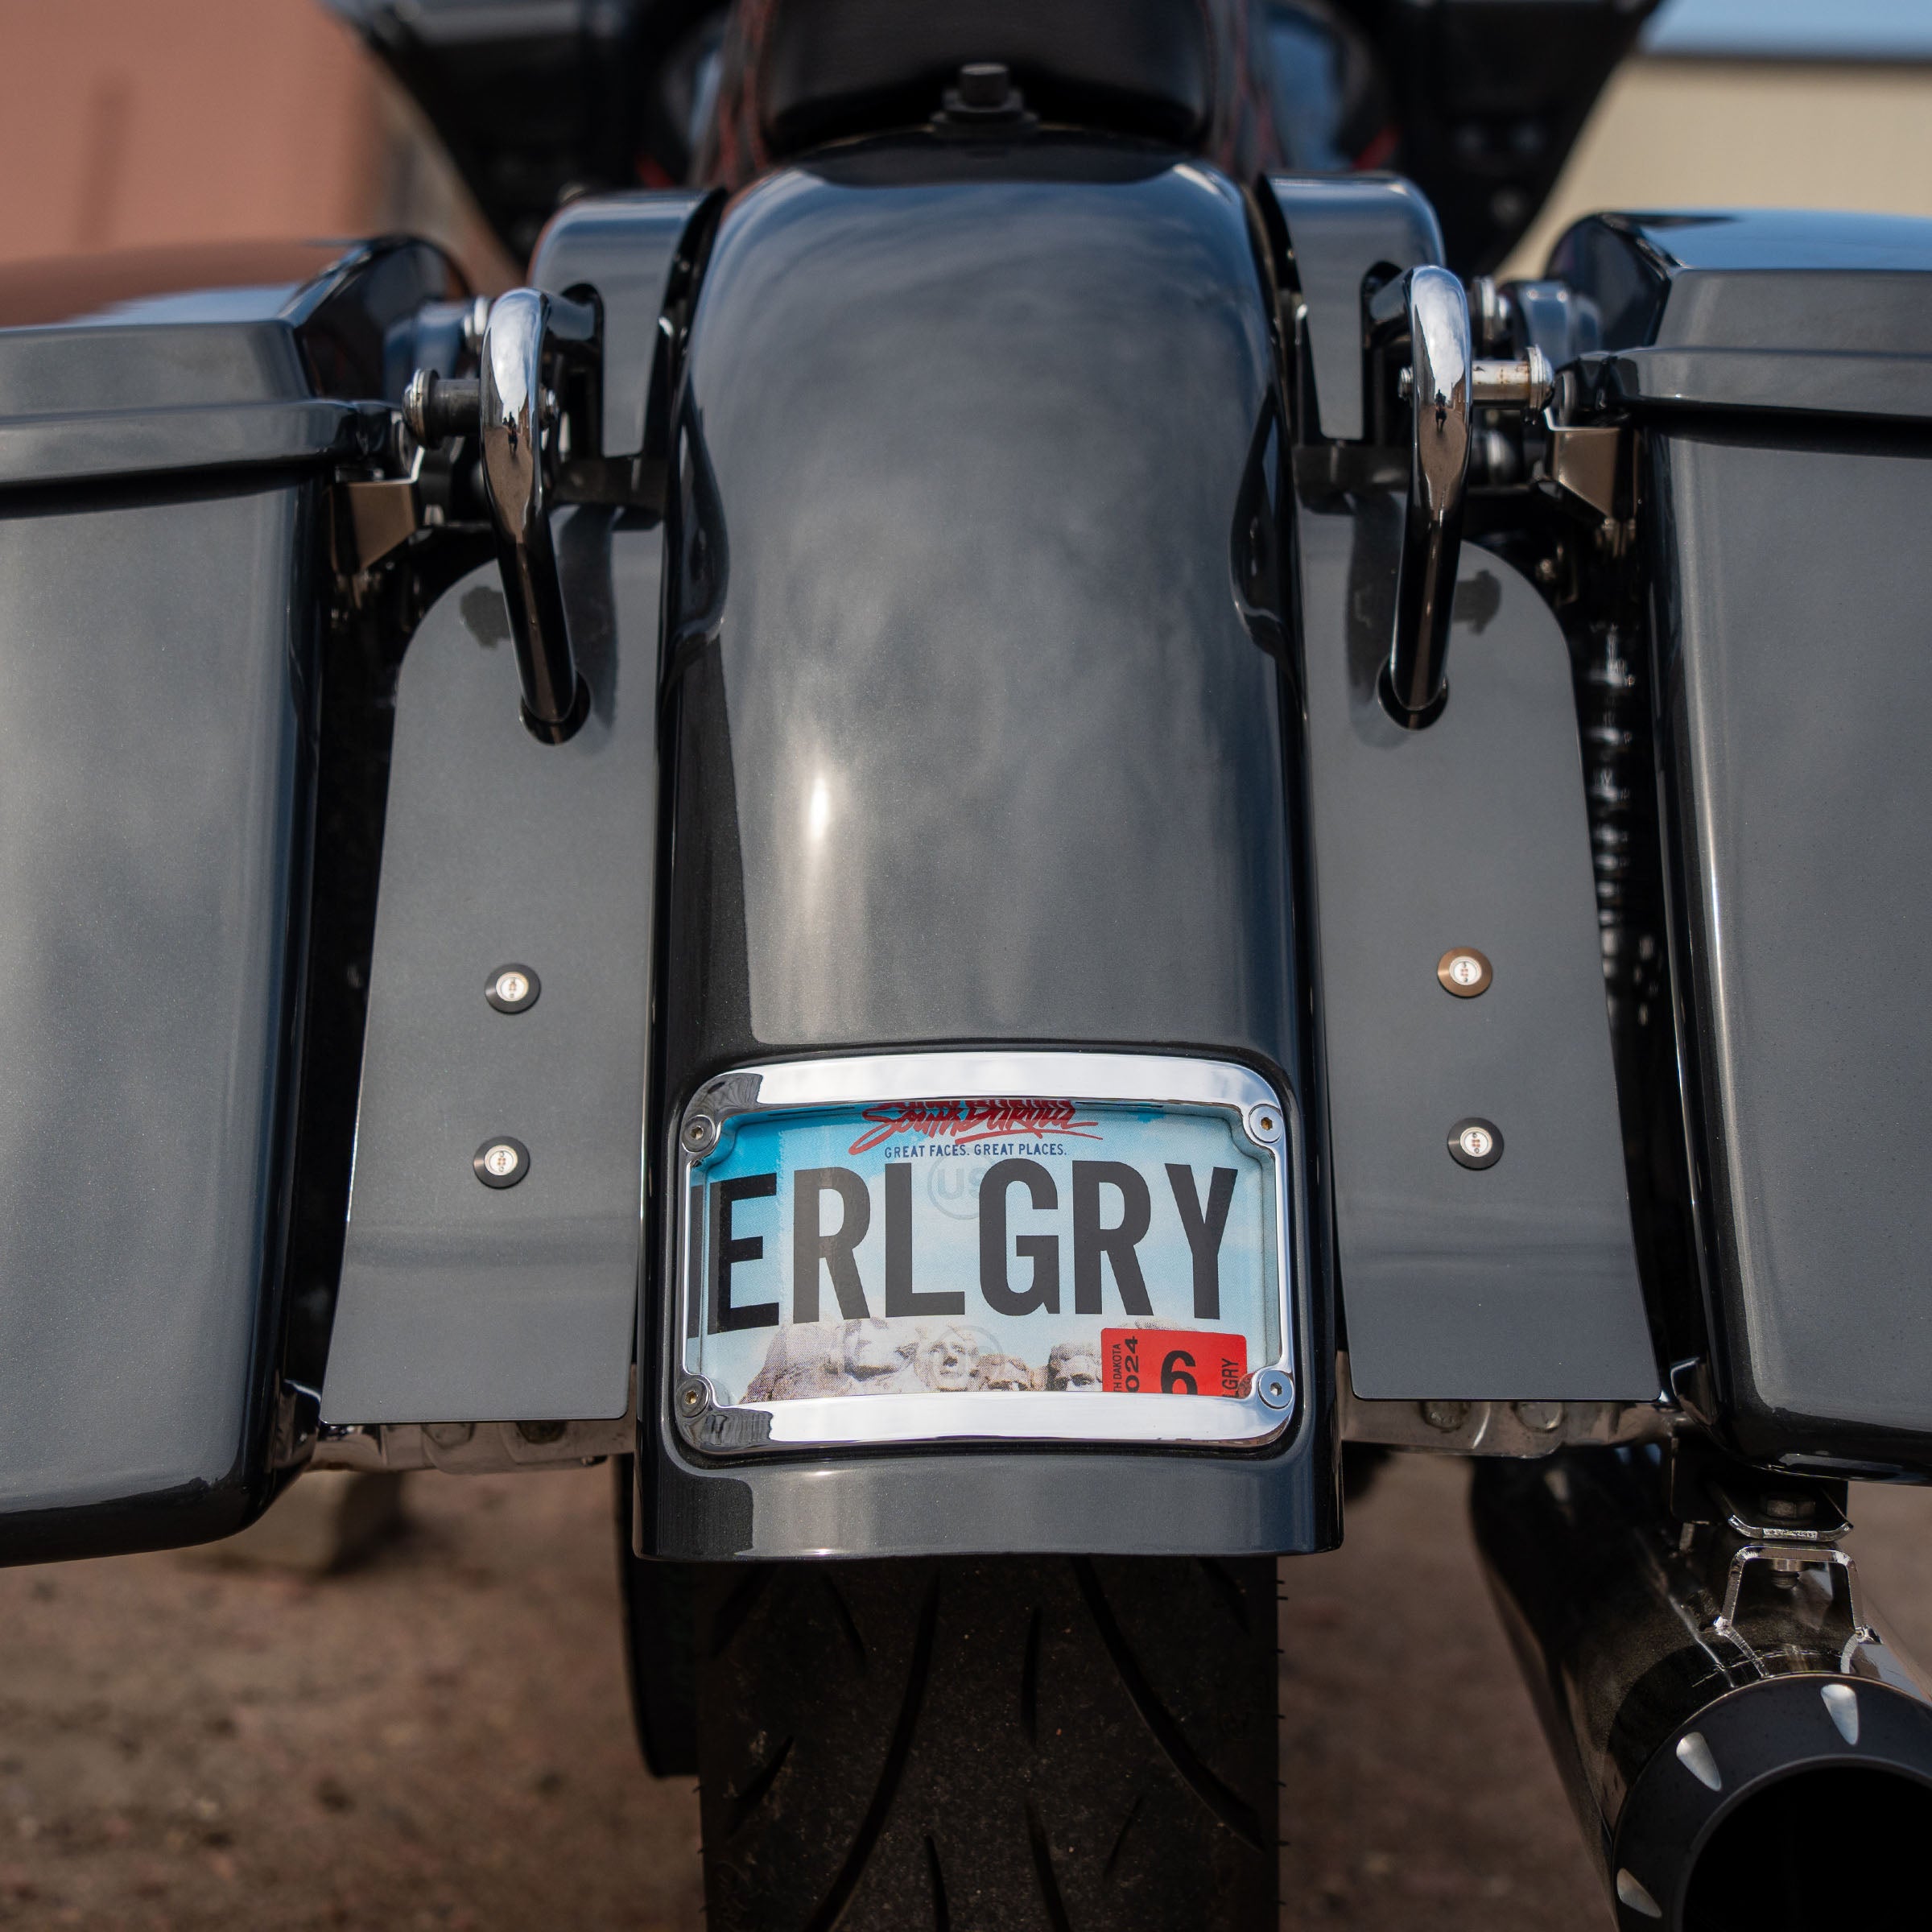 License Plate Frames for Motorcycles (Benchmark Chrome)